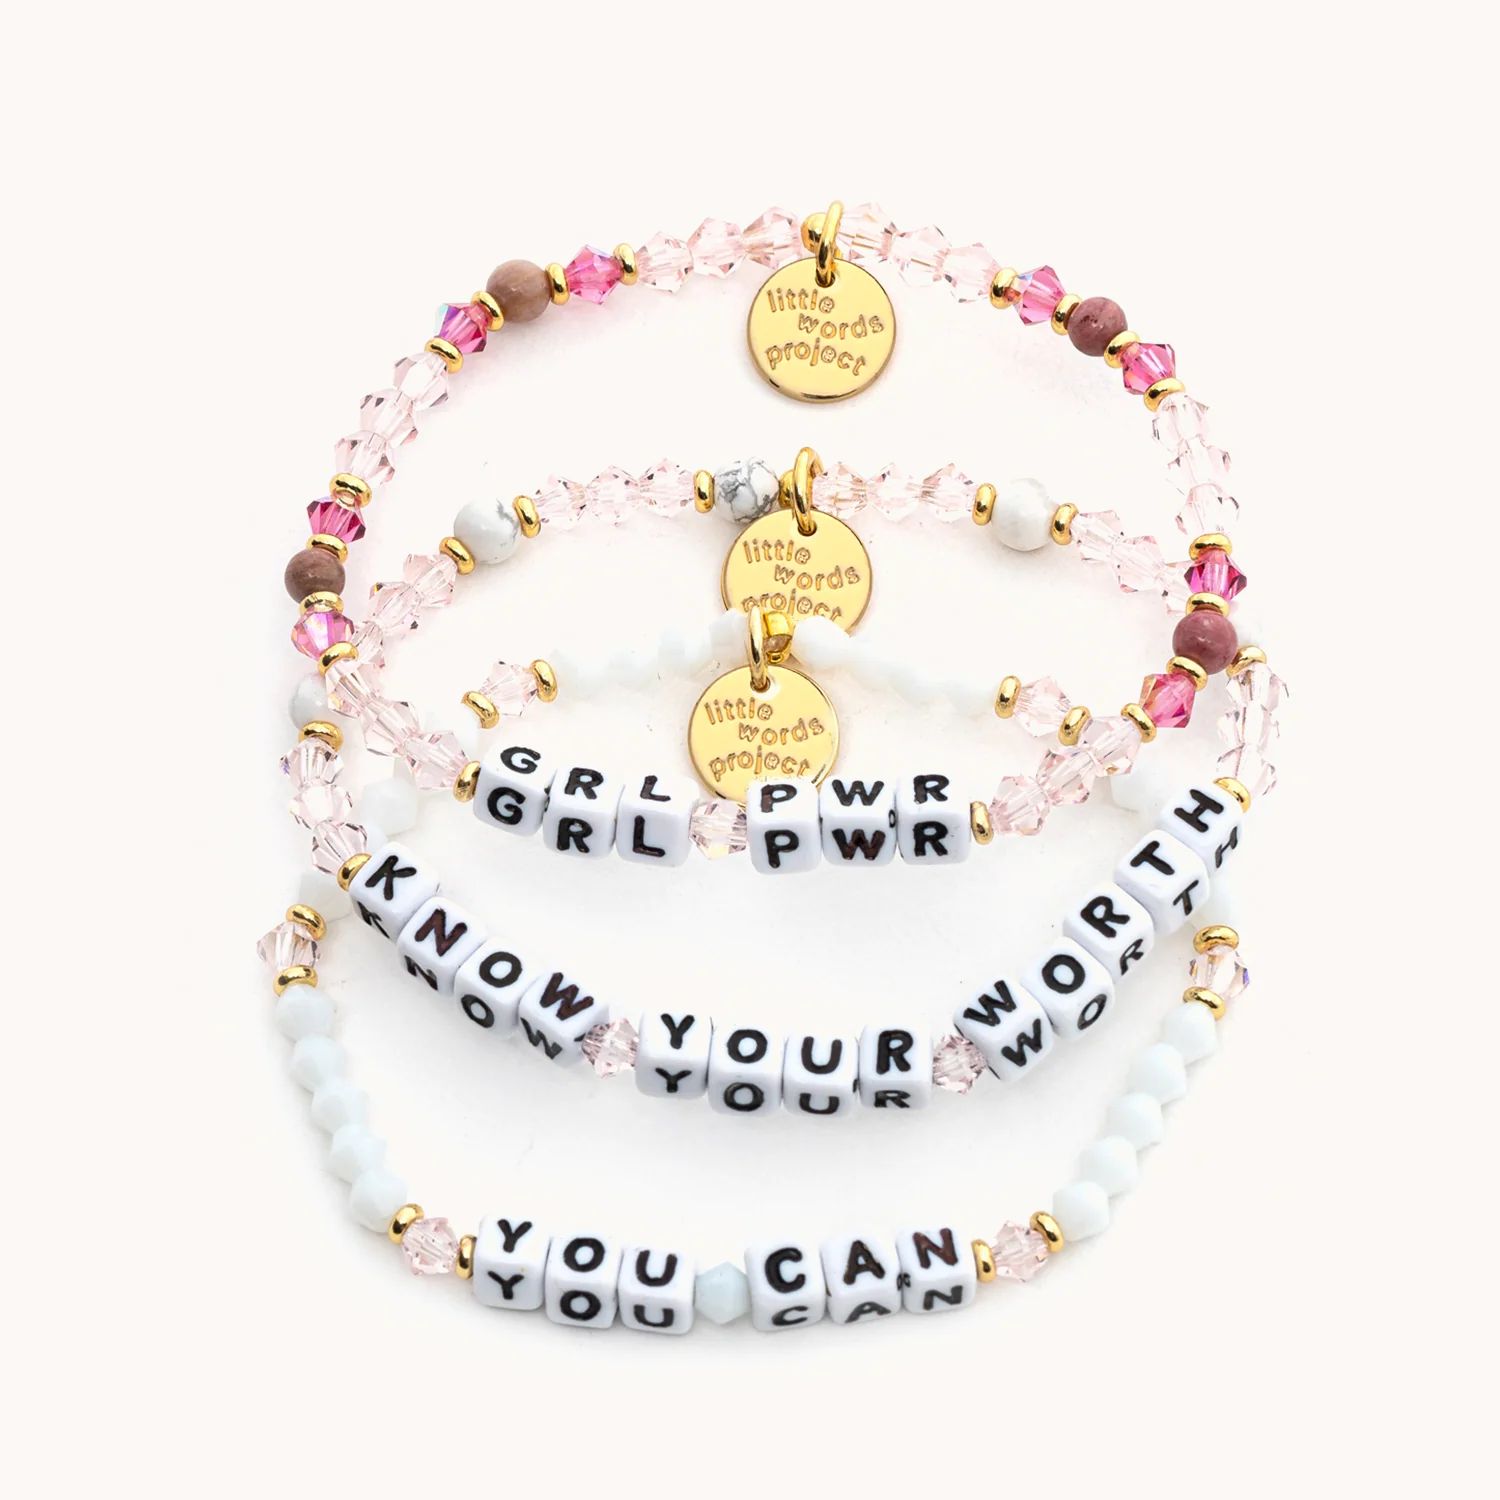 Girl Power Stack | Little Words Project